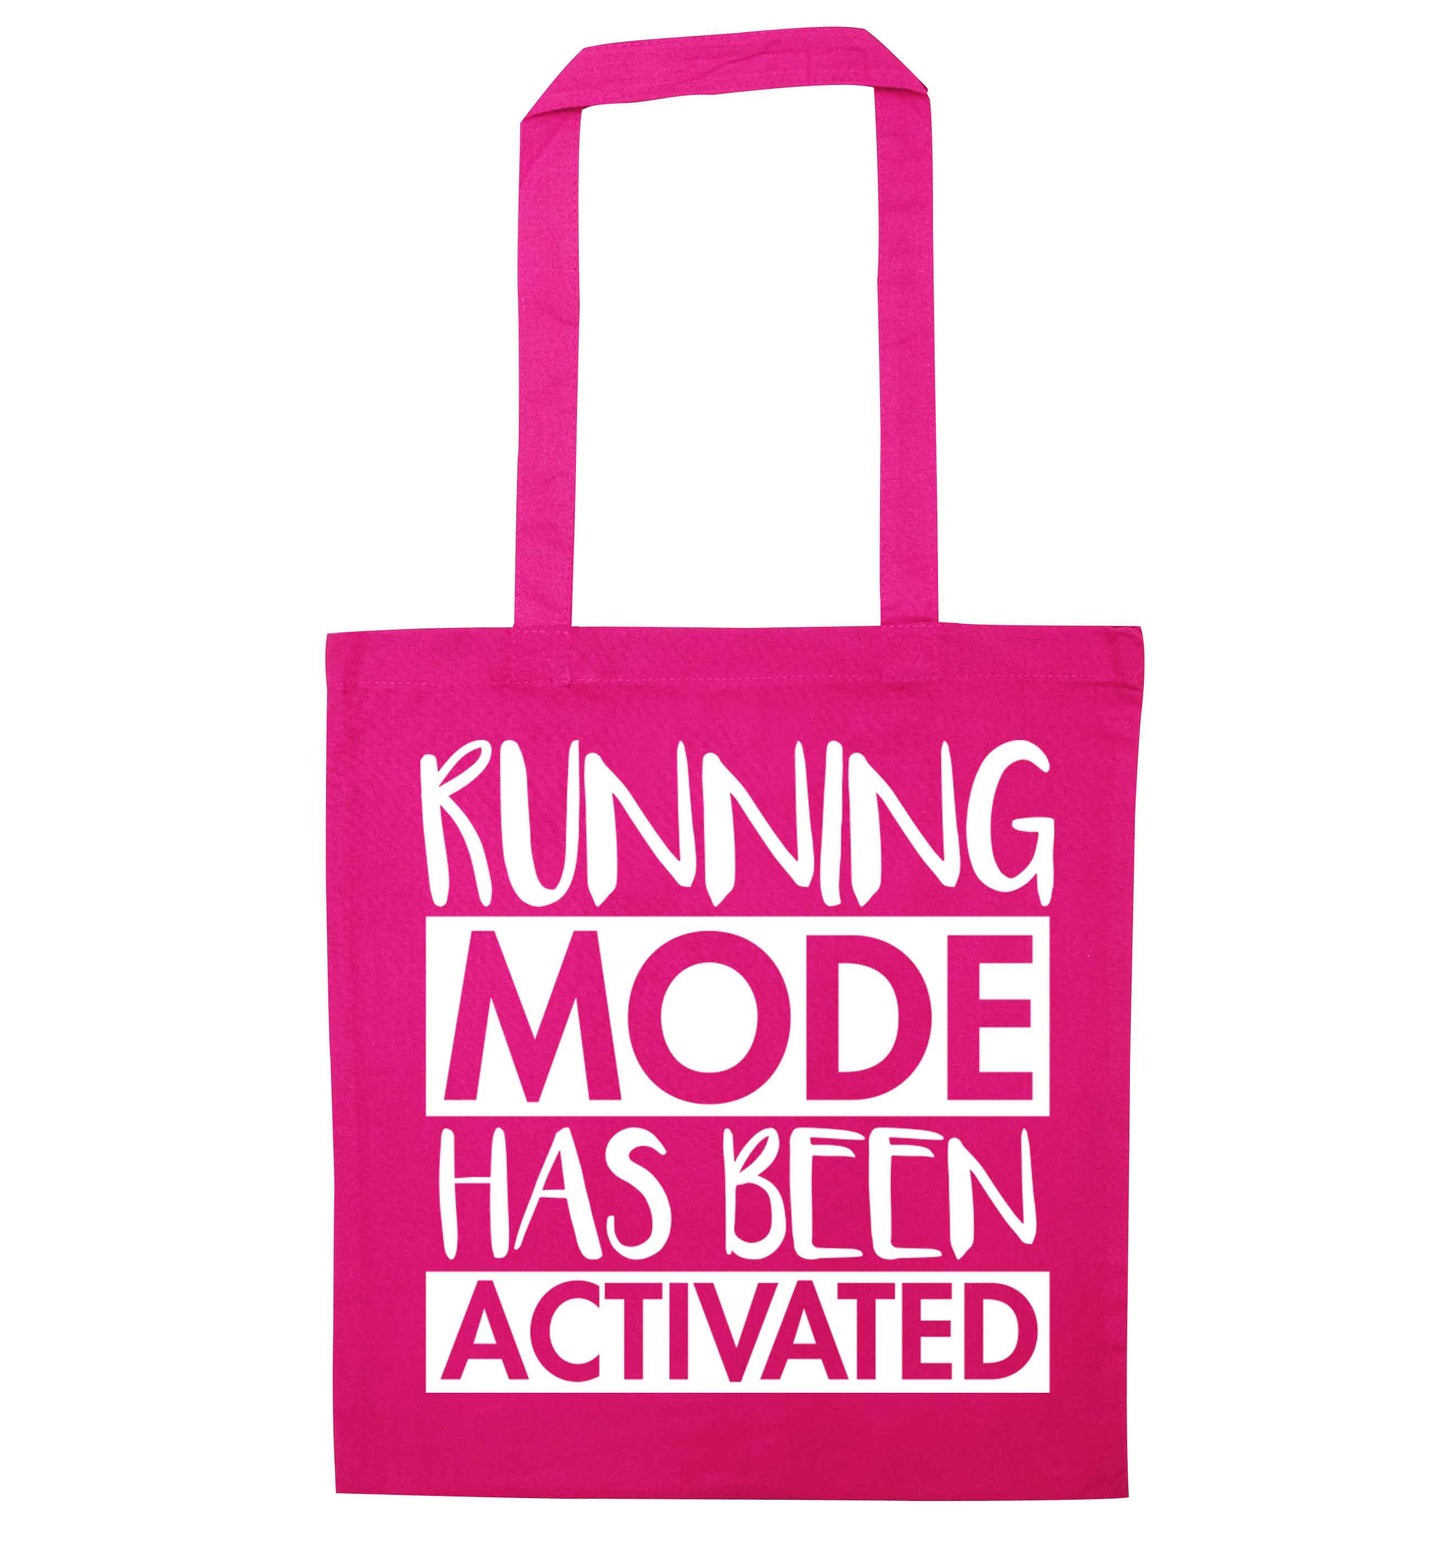 Running mode has been activated pink tote bag